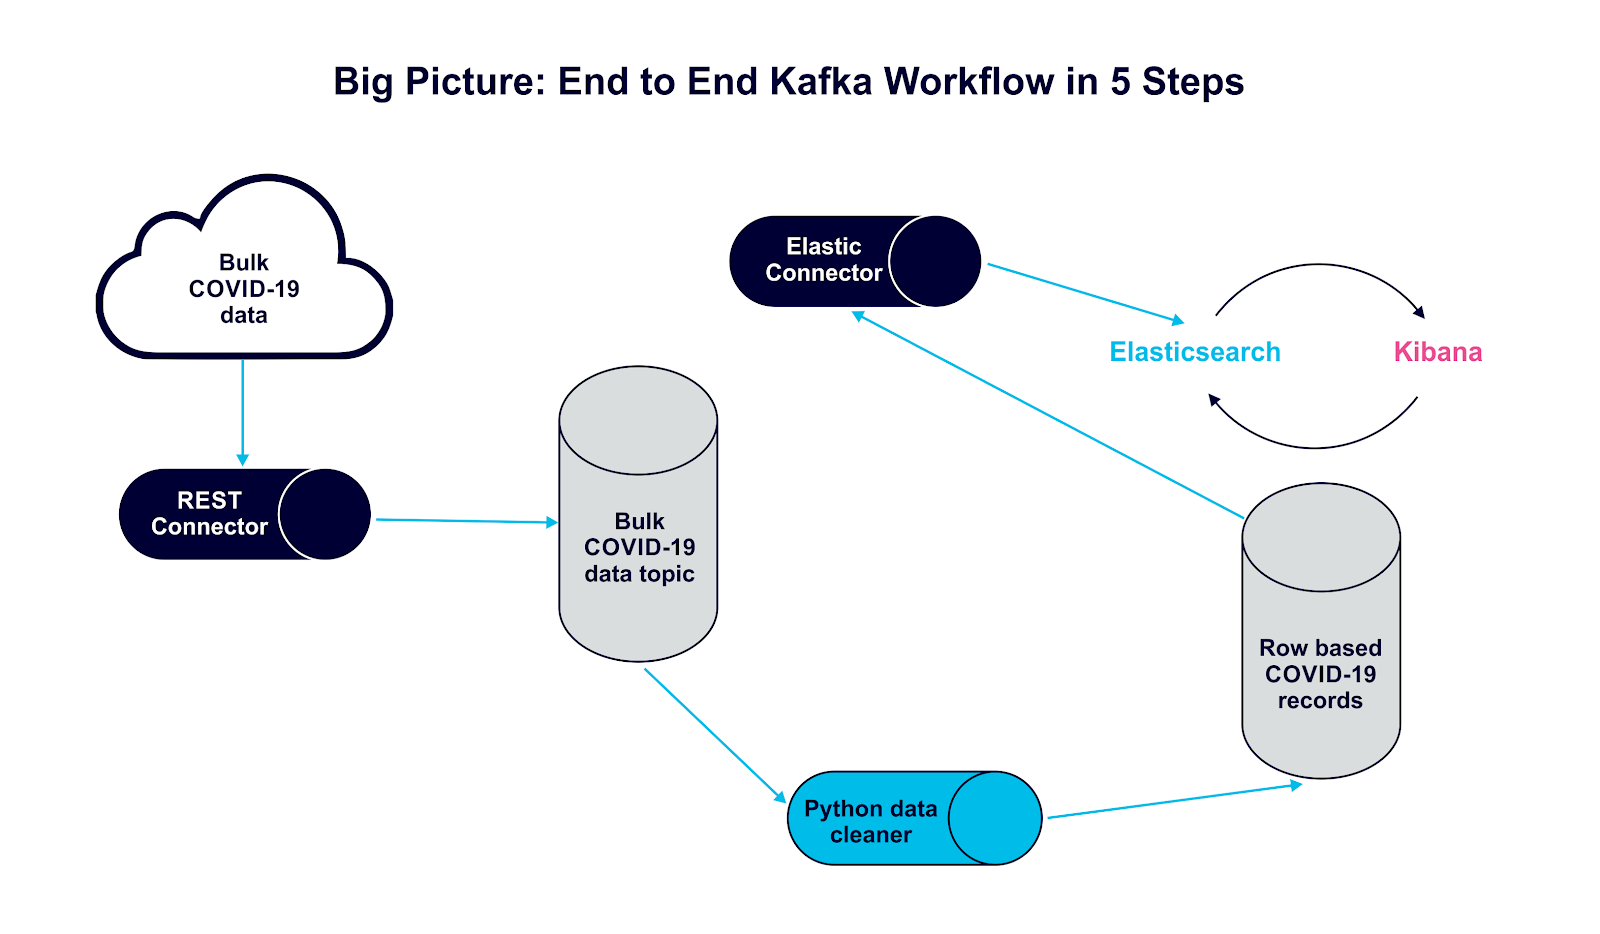 Workflow to clean bulk COVID-19 data - Python 3 to clean the data stored in Kafka and place it into Elasticsearch